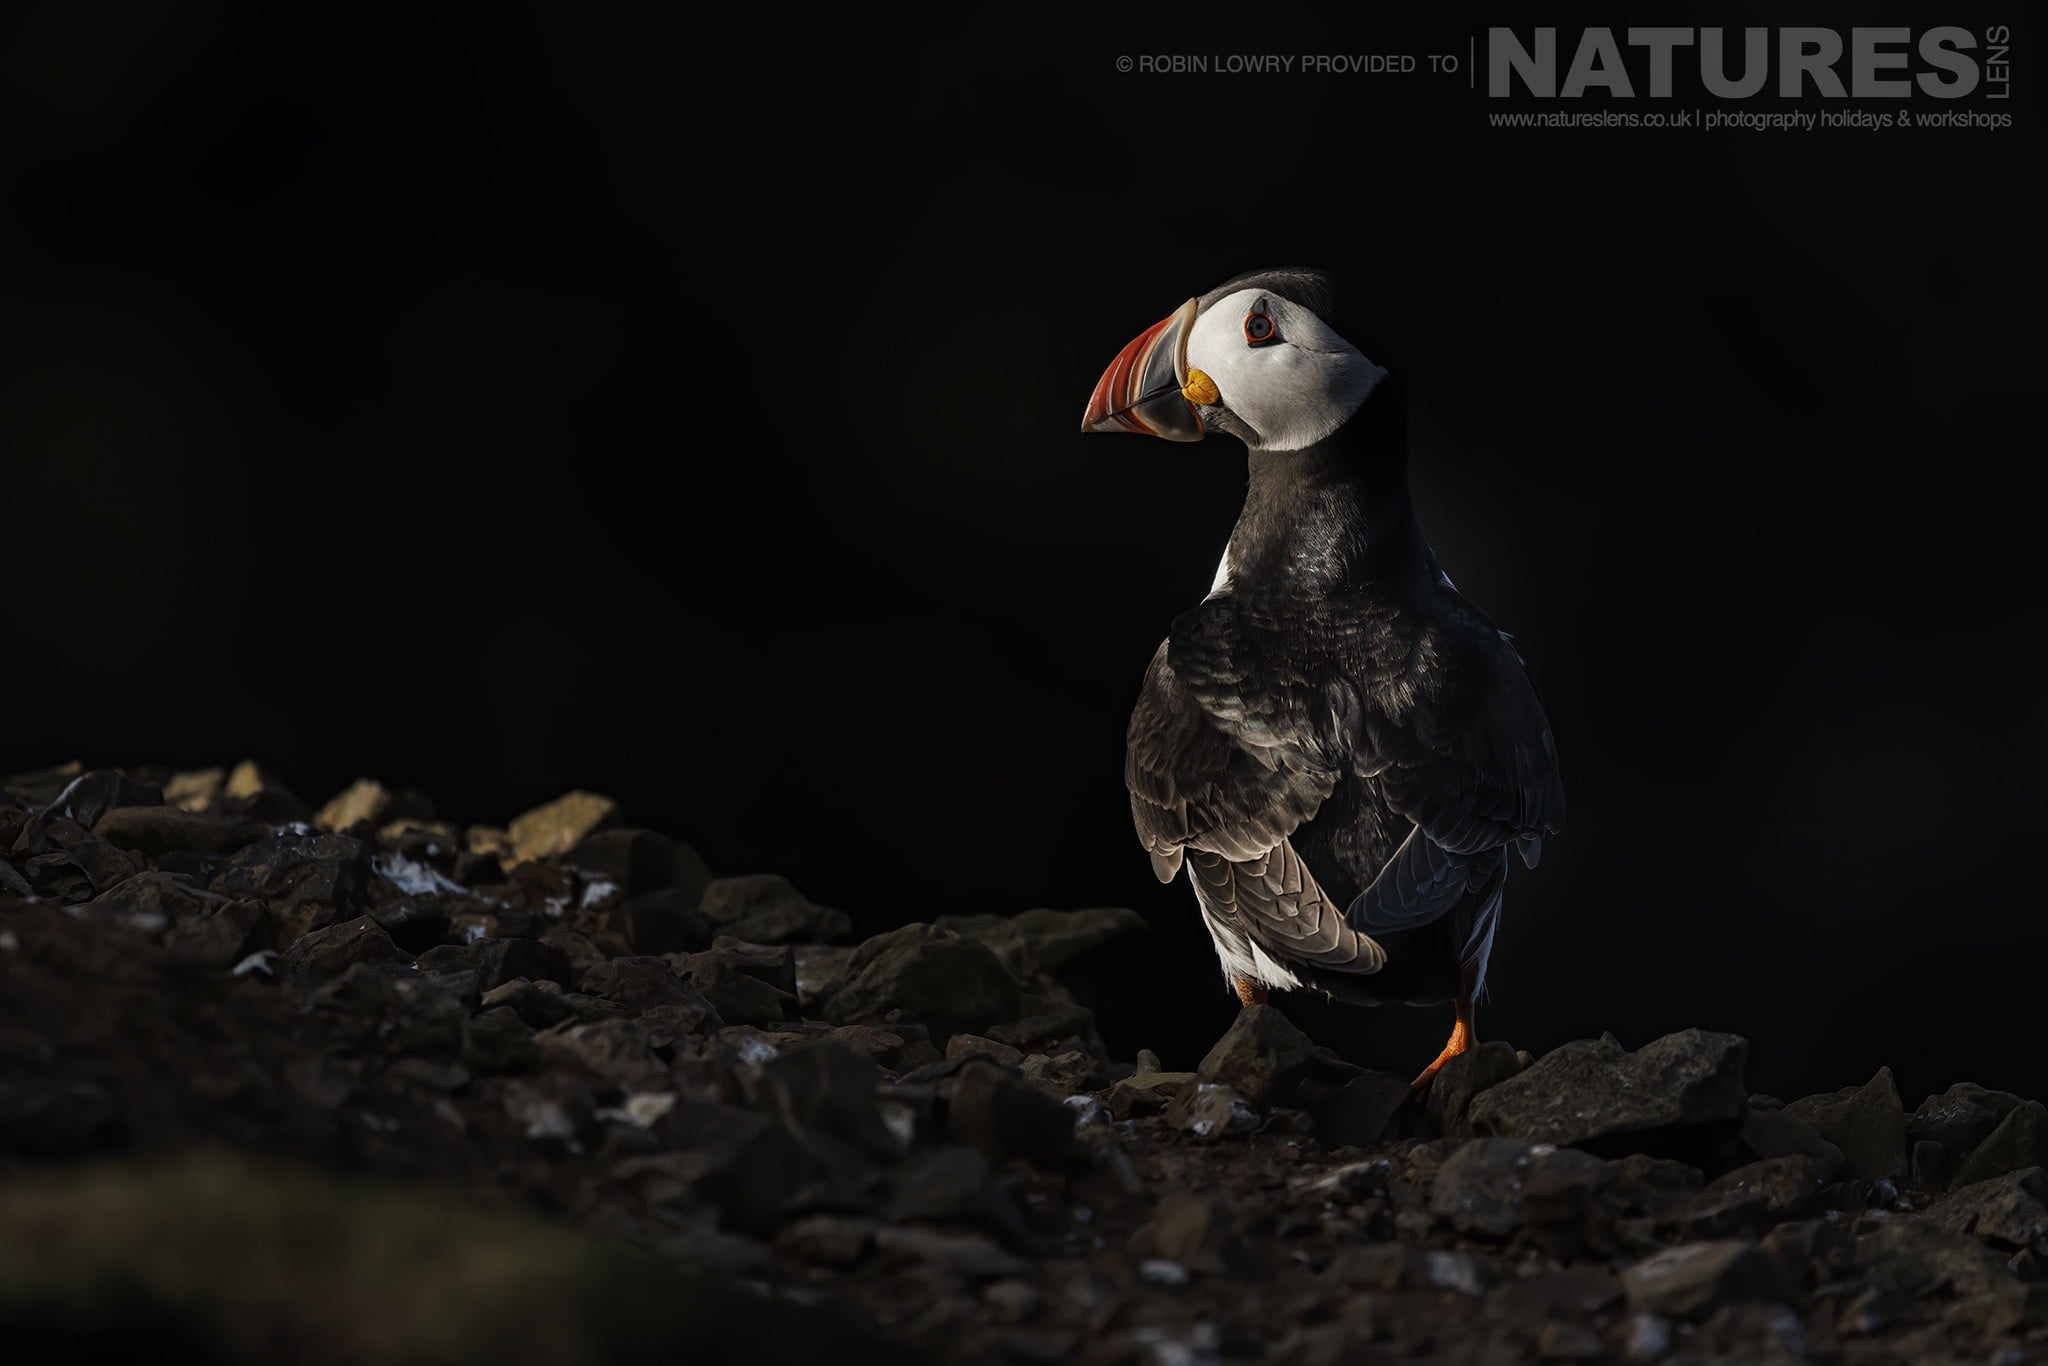 One of the Puffins of Skomer poses in the late light of the day - this image was captured during the NaturesLens Comical Puffins of Skomer Island photography holiday